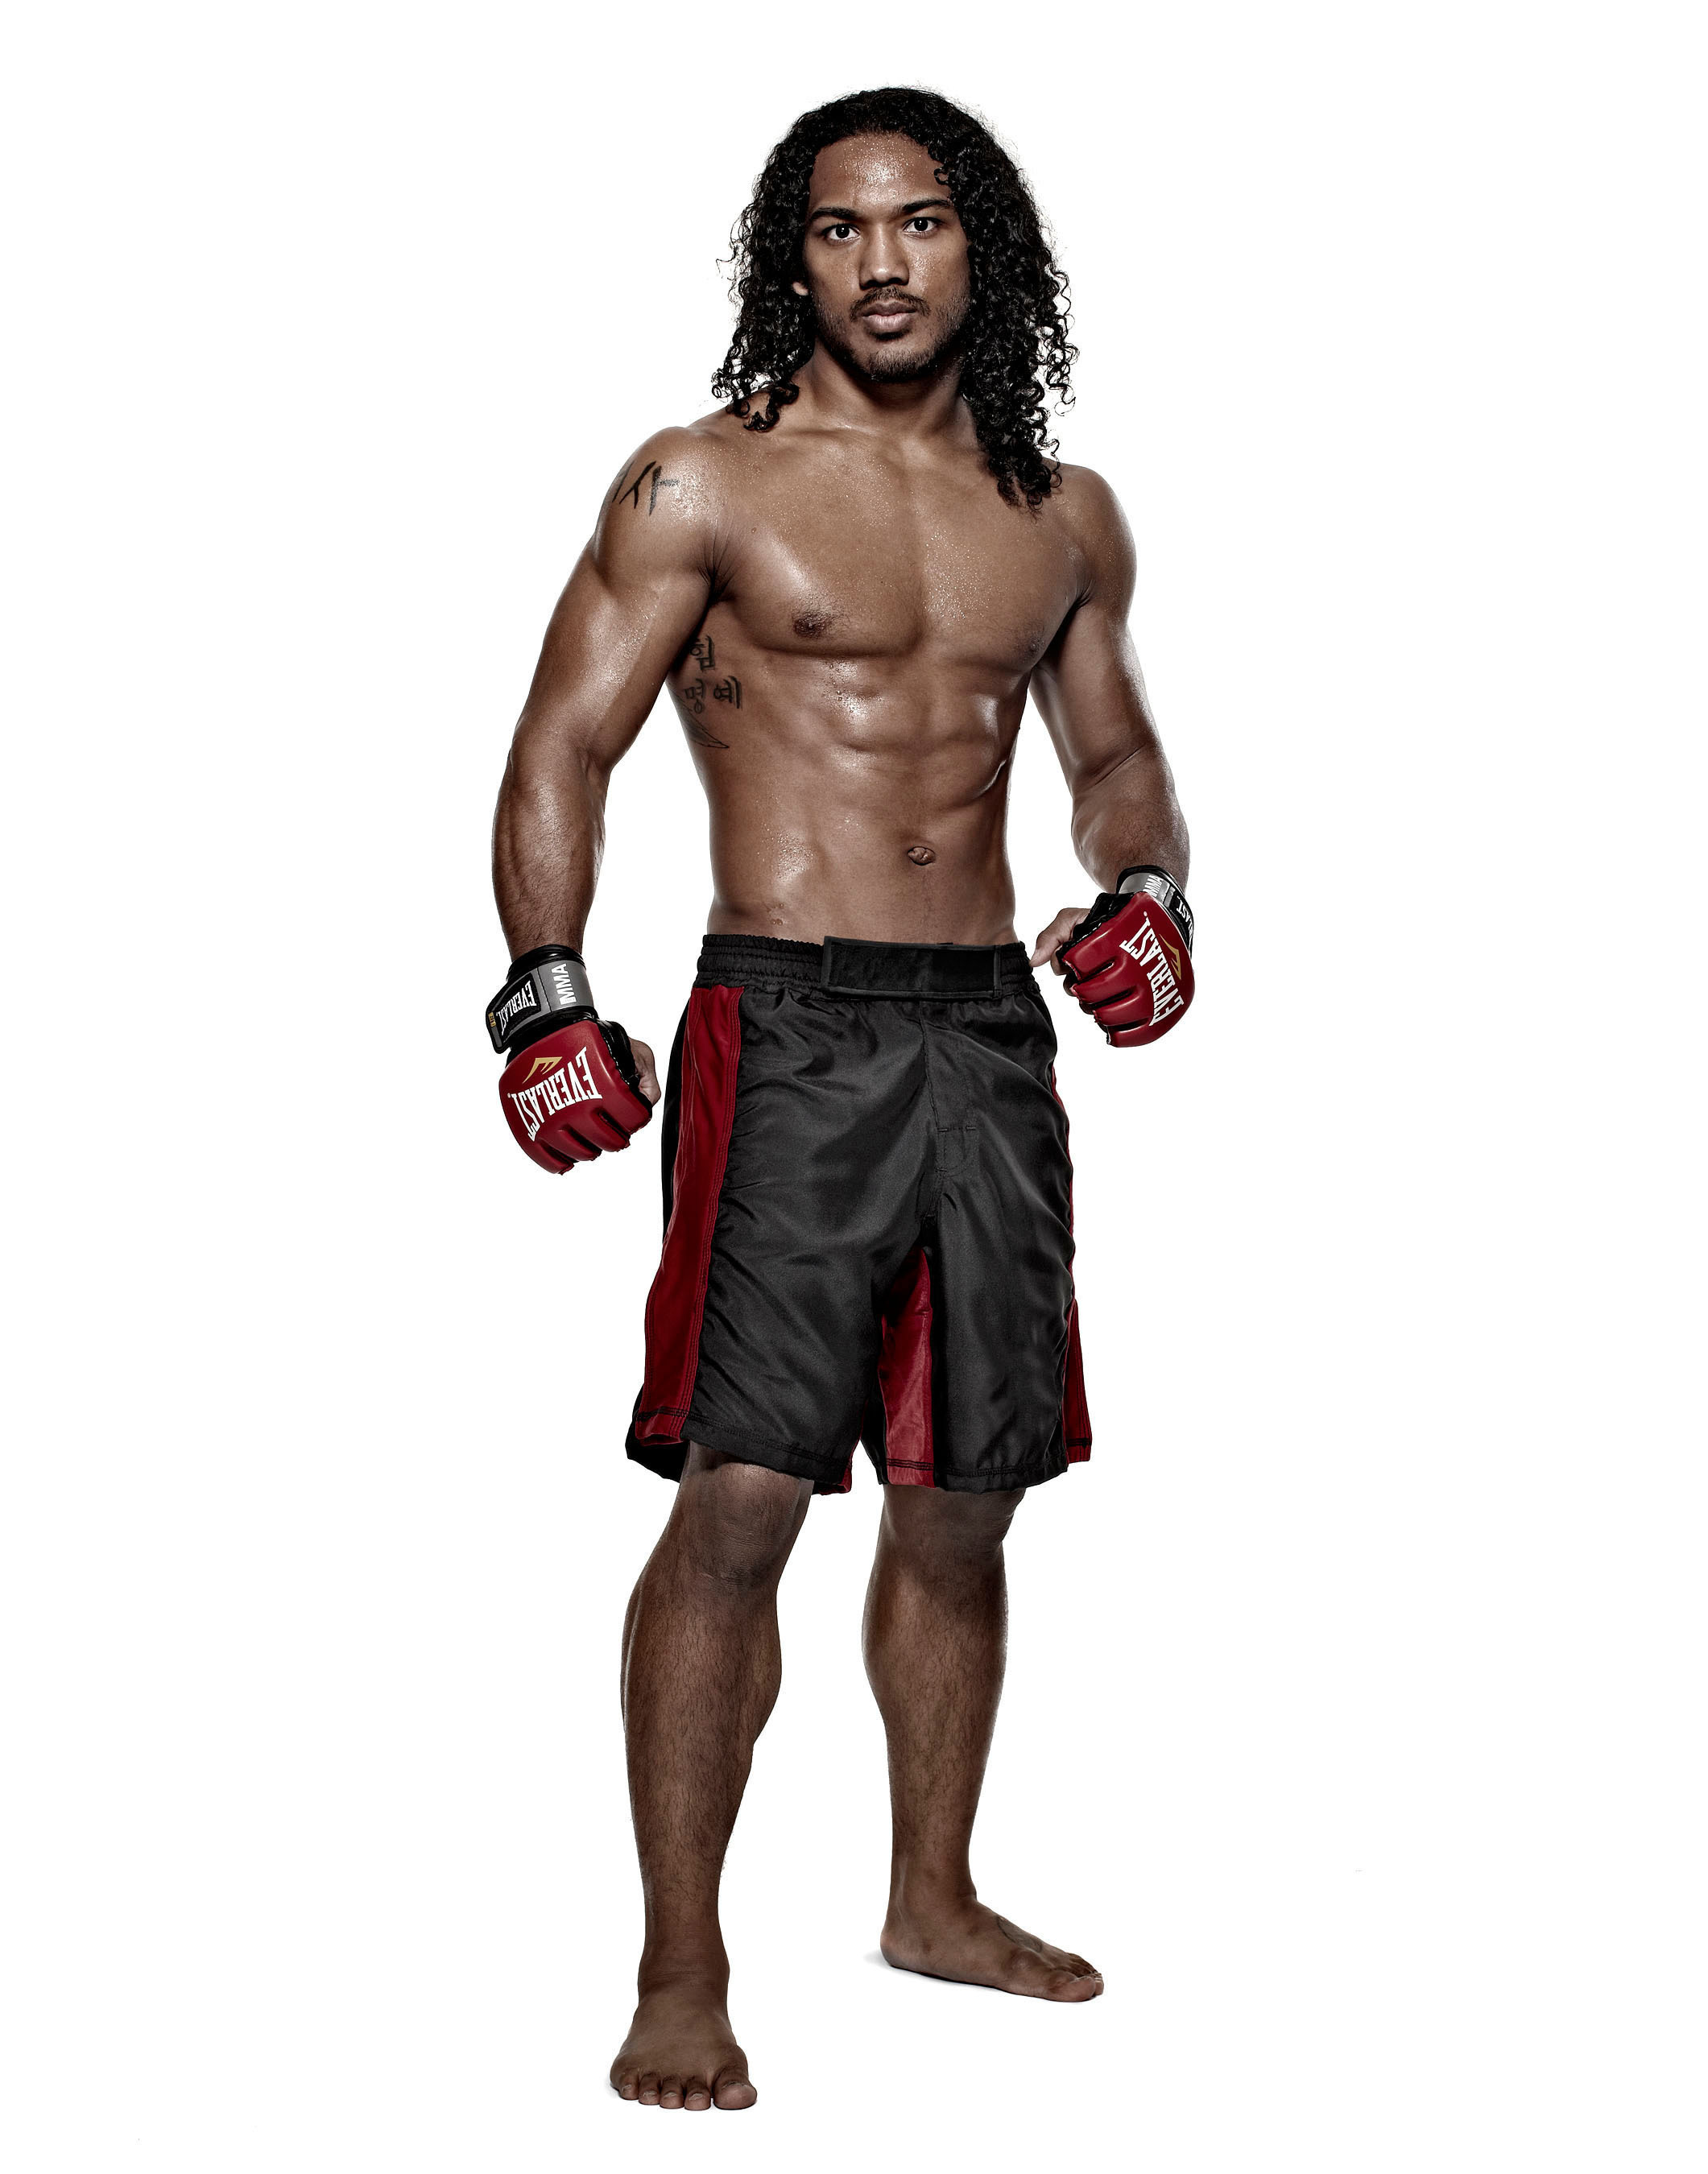 Everlast And Mixed Martial Arts Champion Ben Henderson Agree To